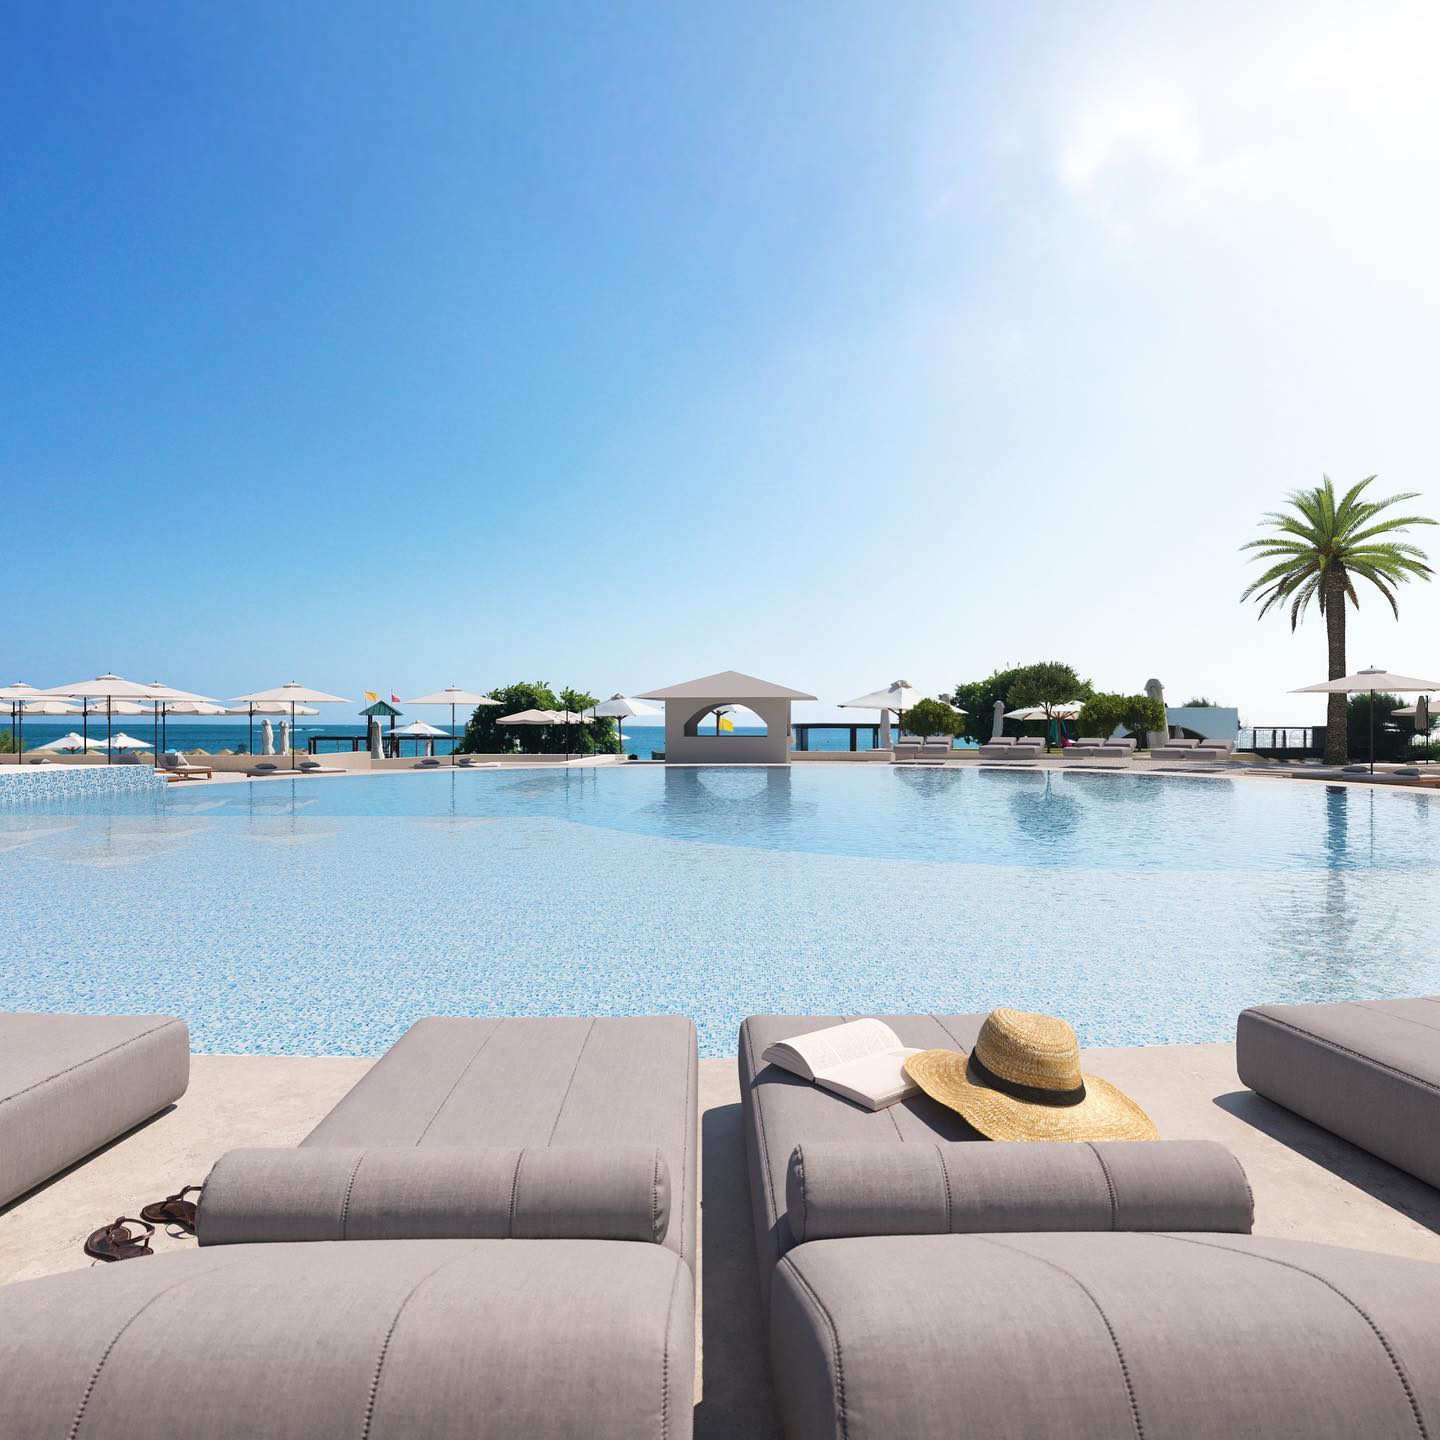 The epitome of Cretan hospitality and relaxation at Creta Maris Resort's superbe pool - Best Resorts in Turkey and Greece